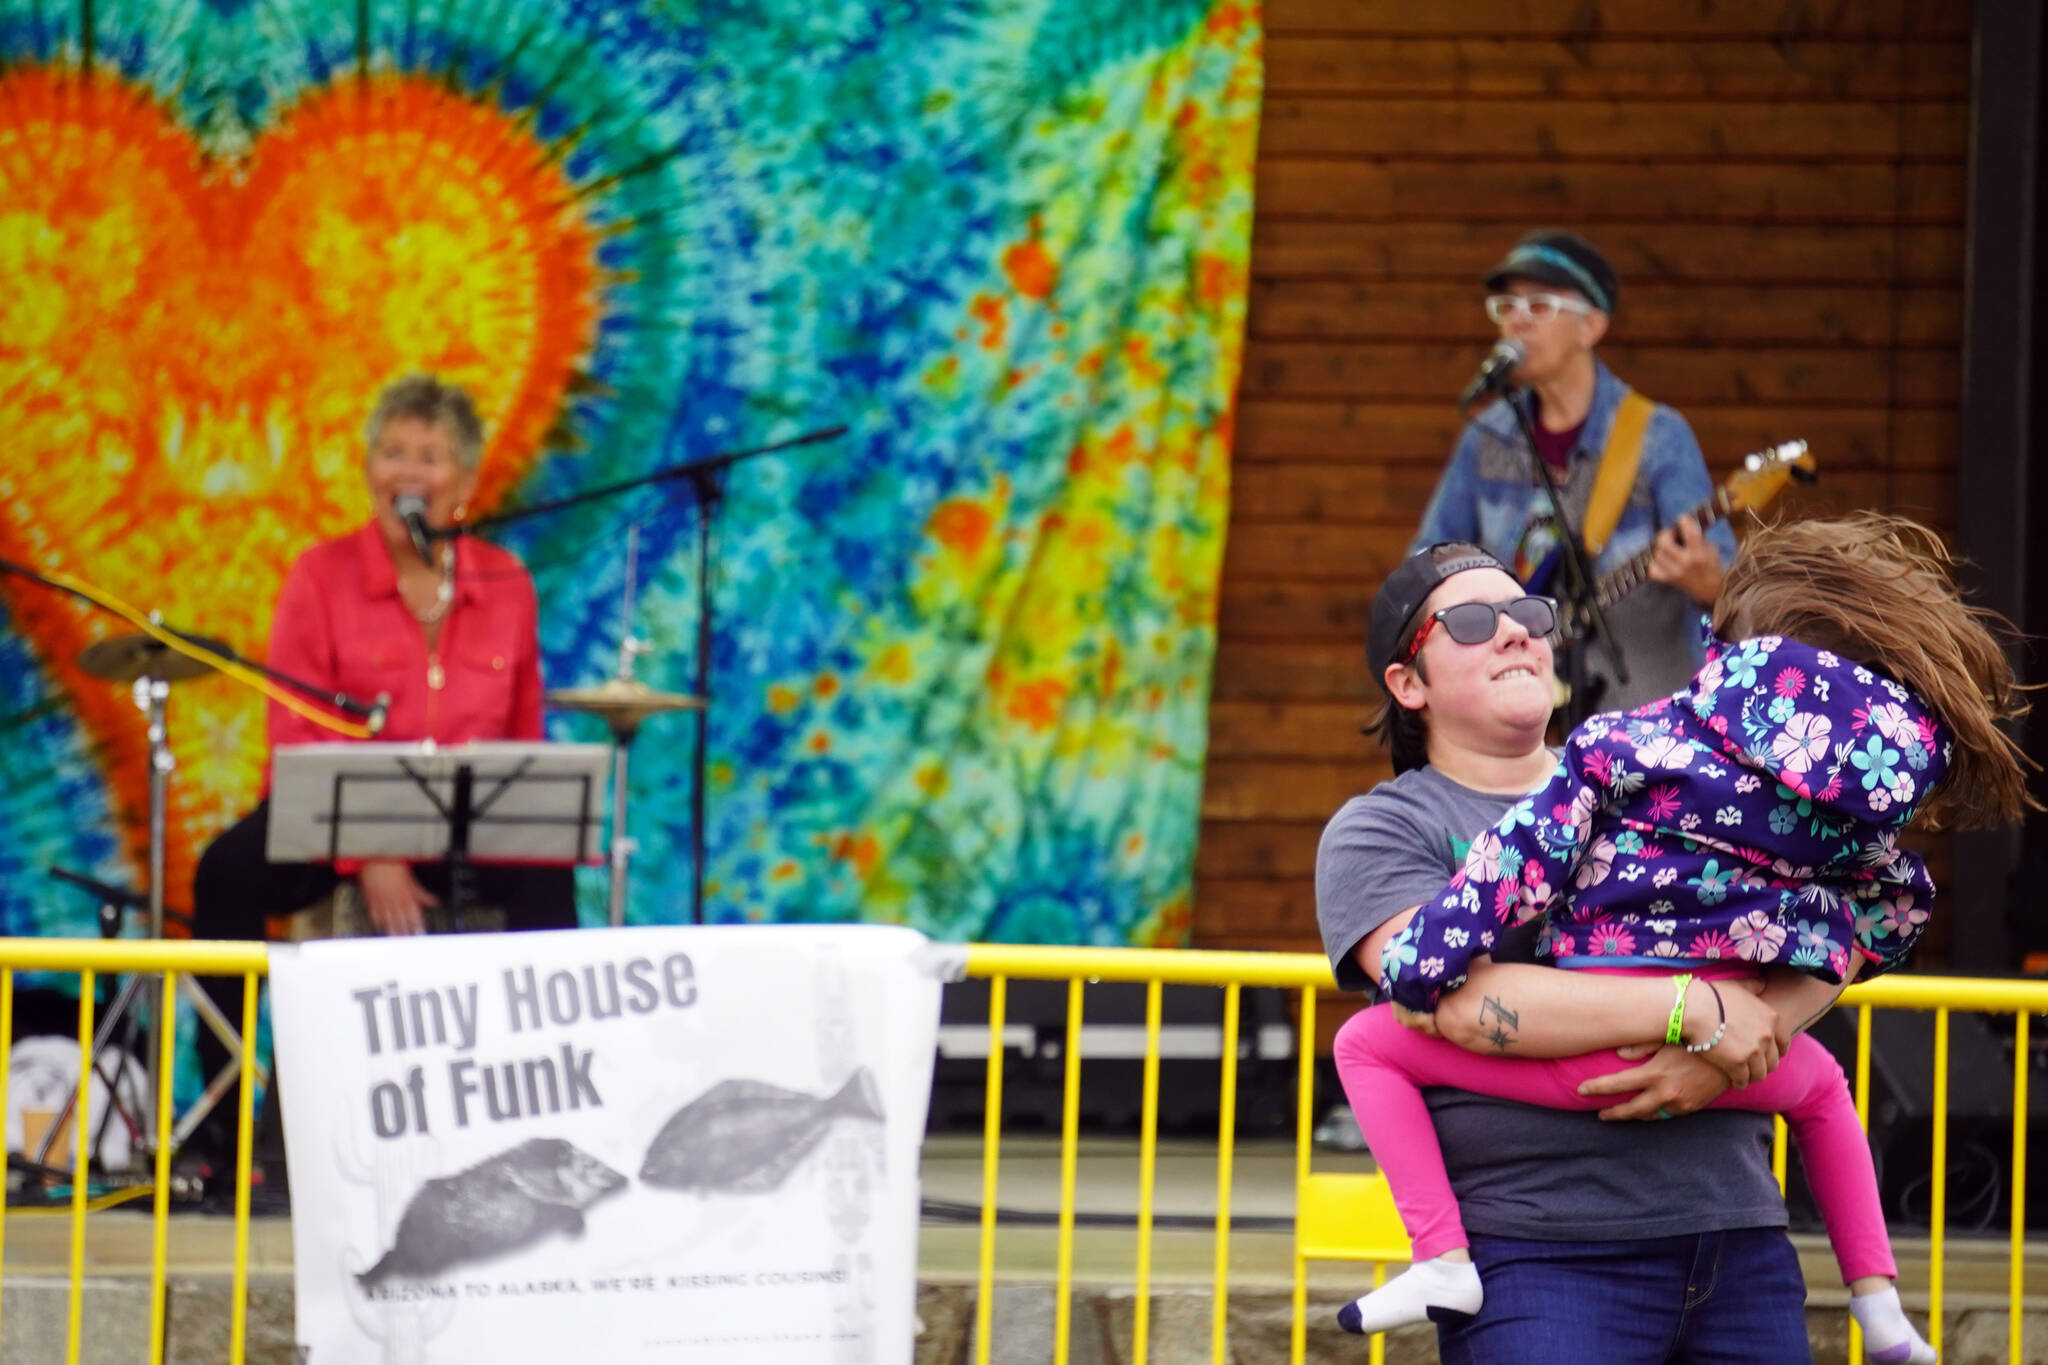 Attendees dance before the stage as Connie Brannock’s Tiny House of Funk performs during the Soldotna Music Series at Soldotna Creek Park in Soldotna, Alaska, on Wednesday, June 21, 2023. (Jake Dye/Peninsula Clarion)